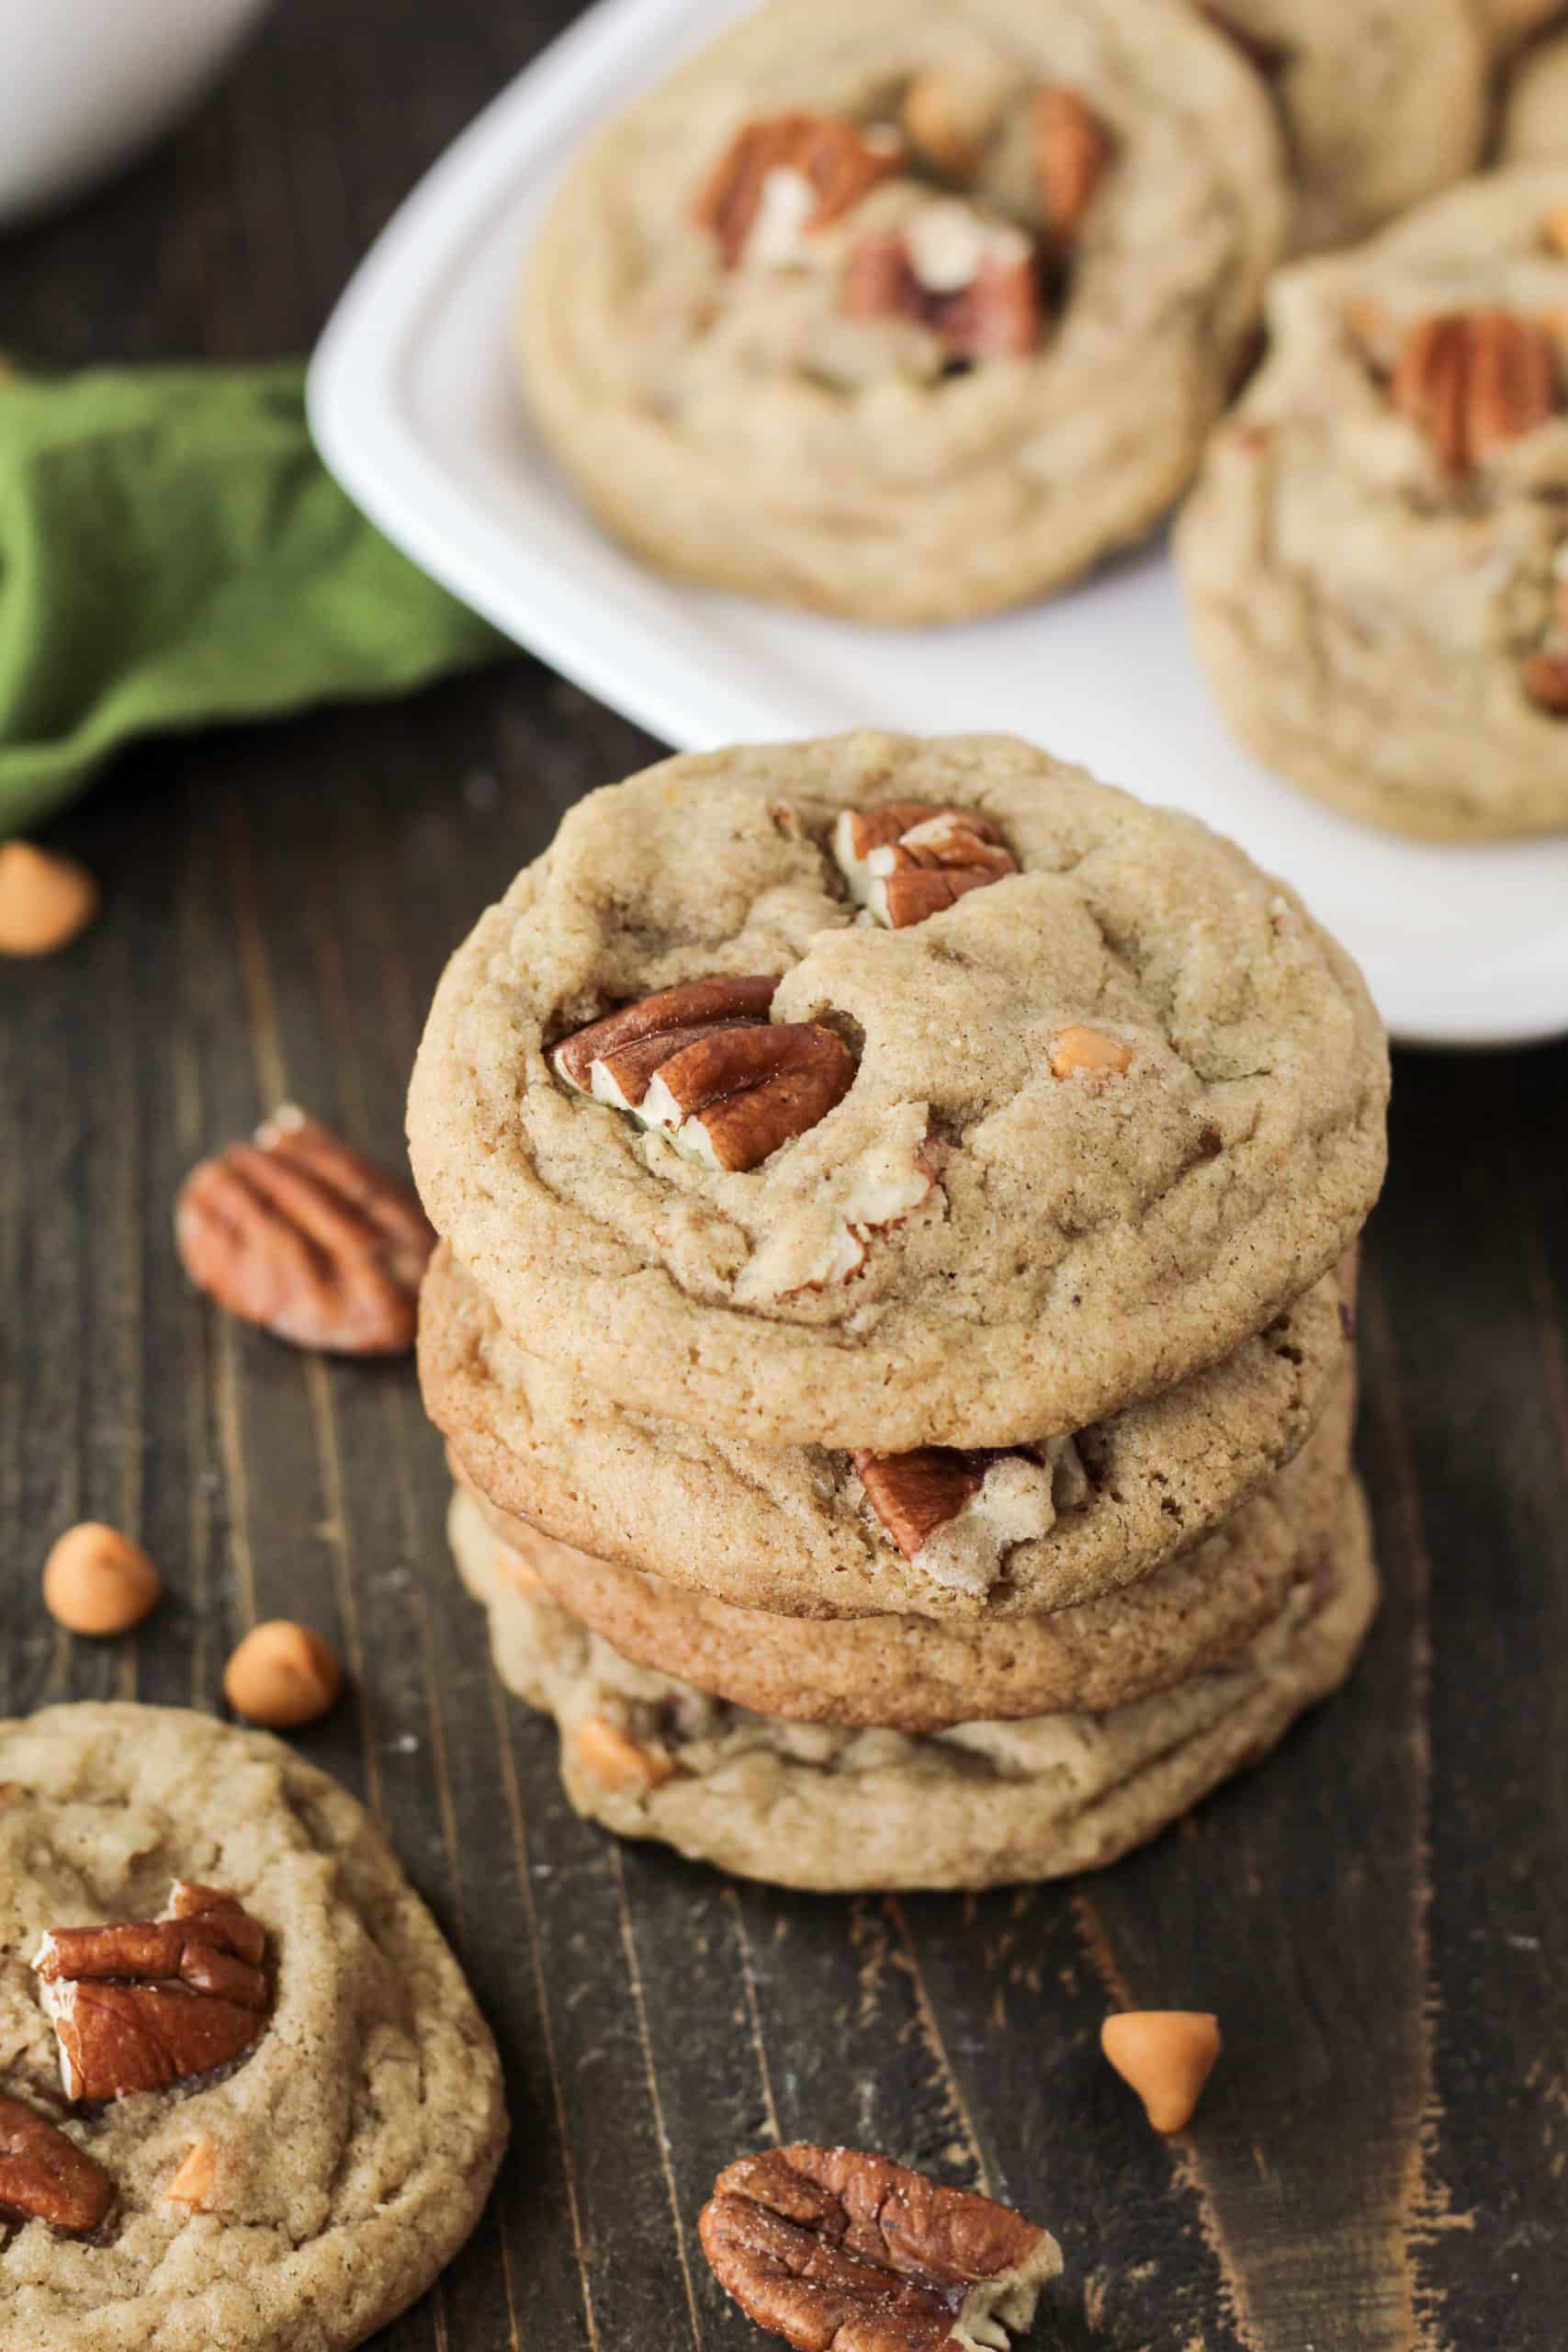 Gluten-free Butter Pecan Cookies (dairy-free option) - Mile High Mitts